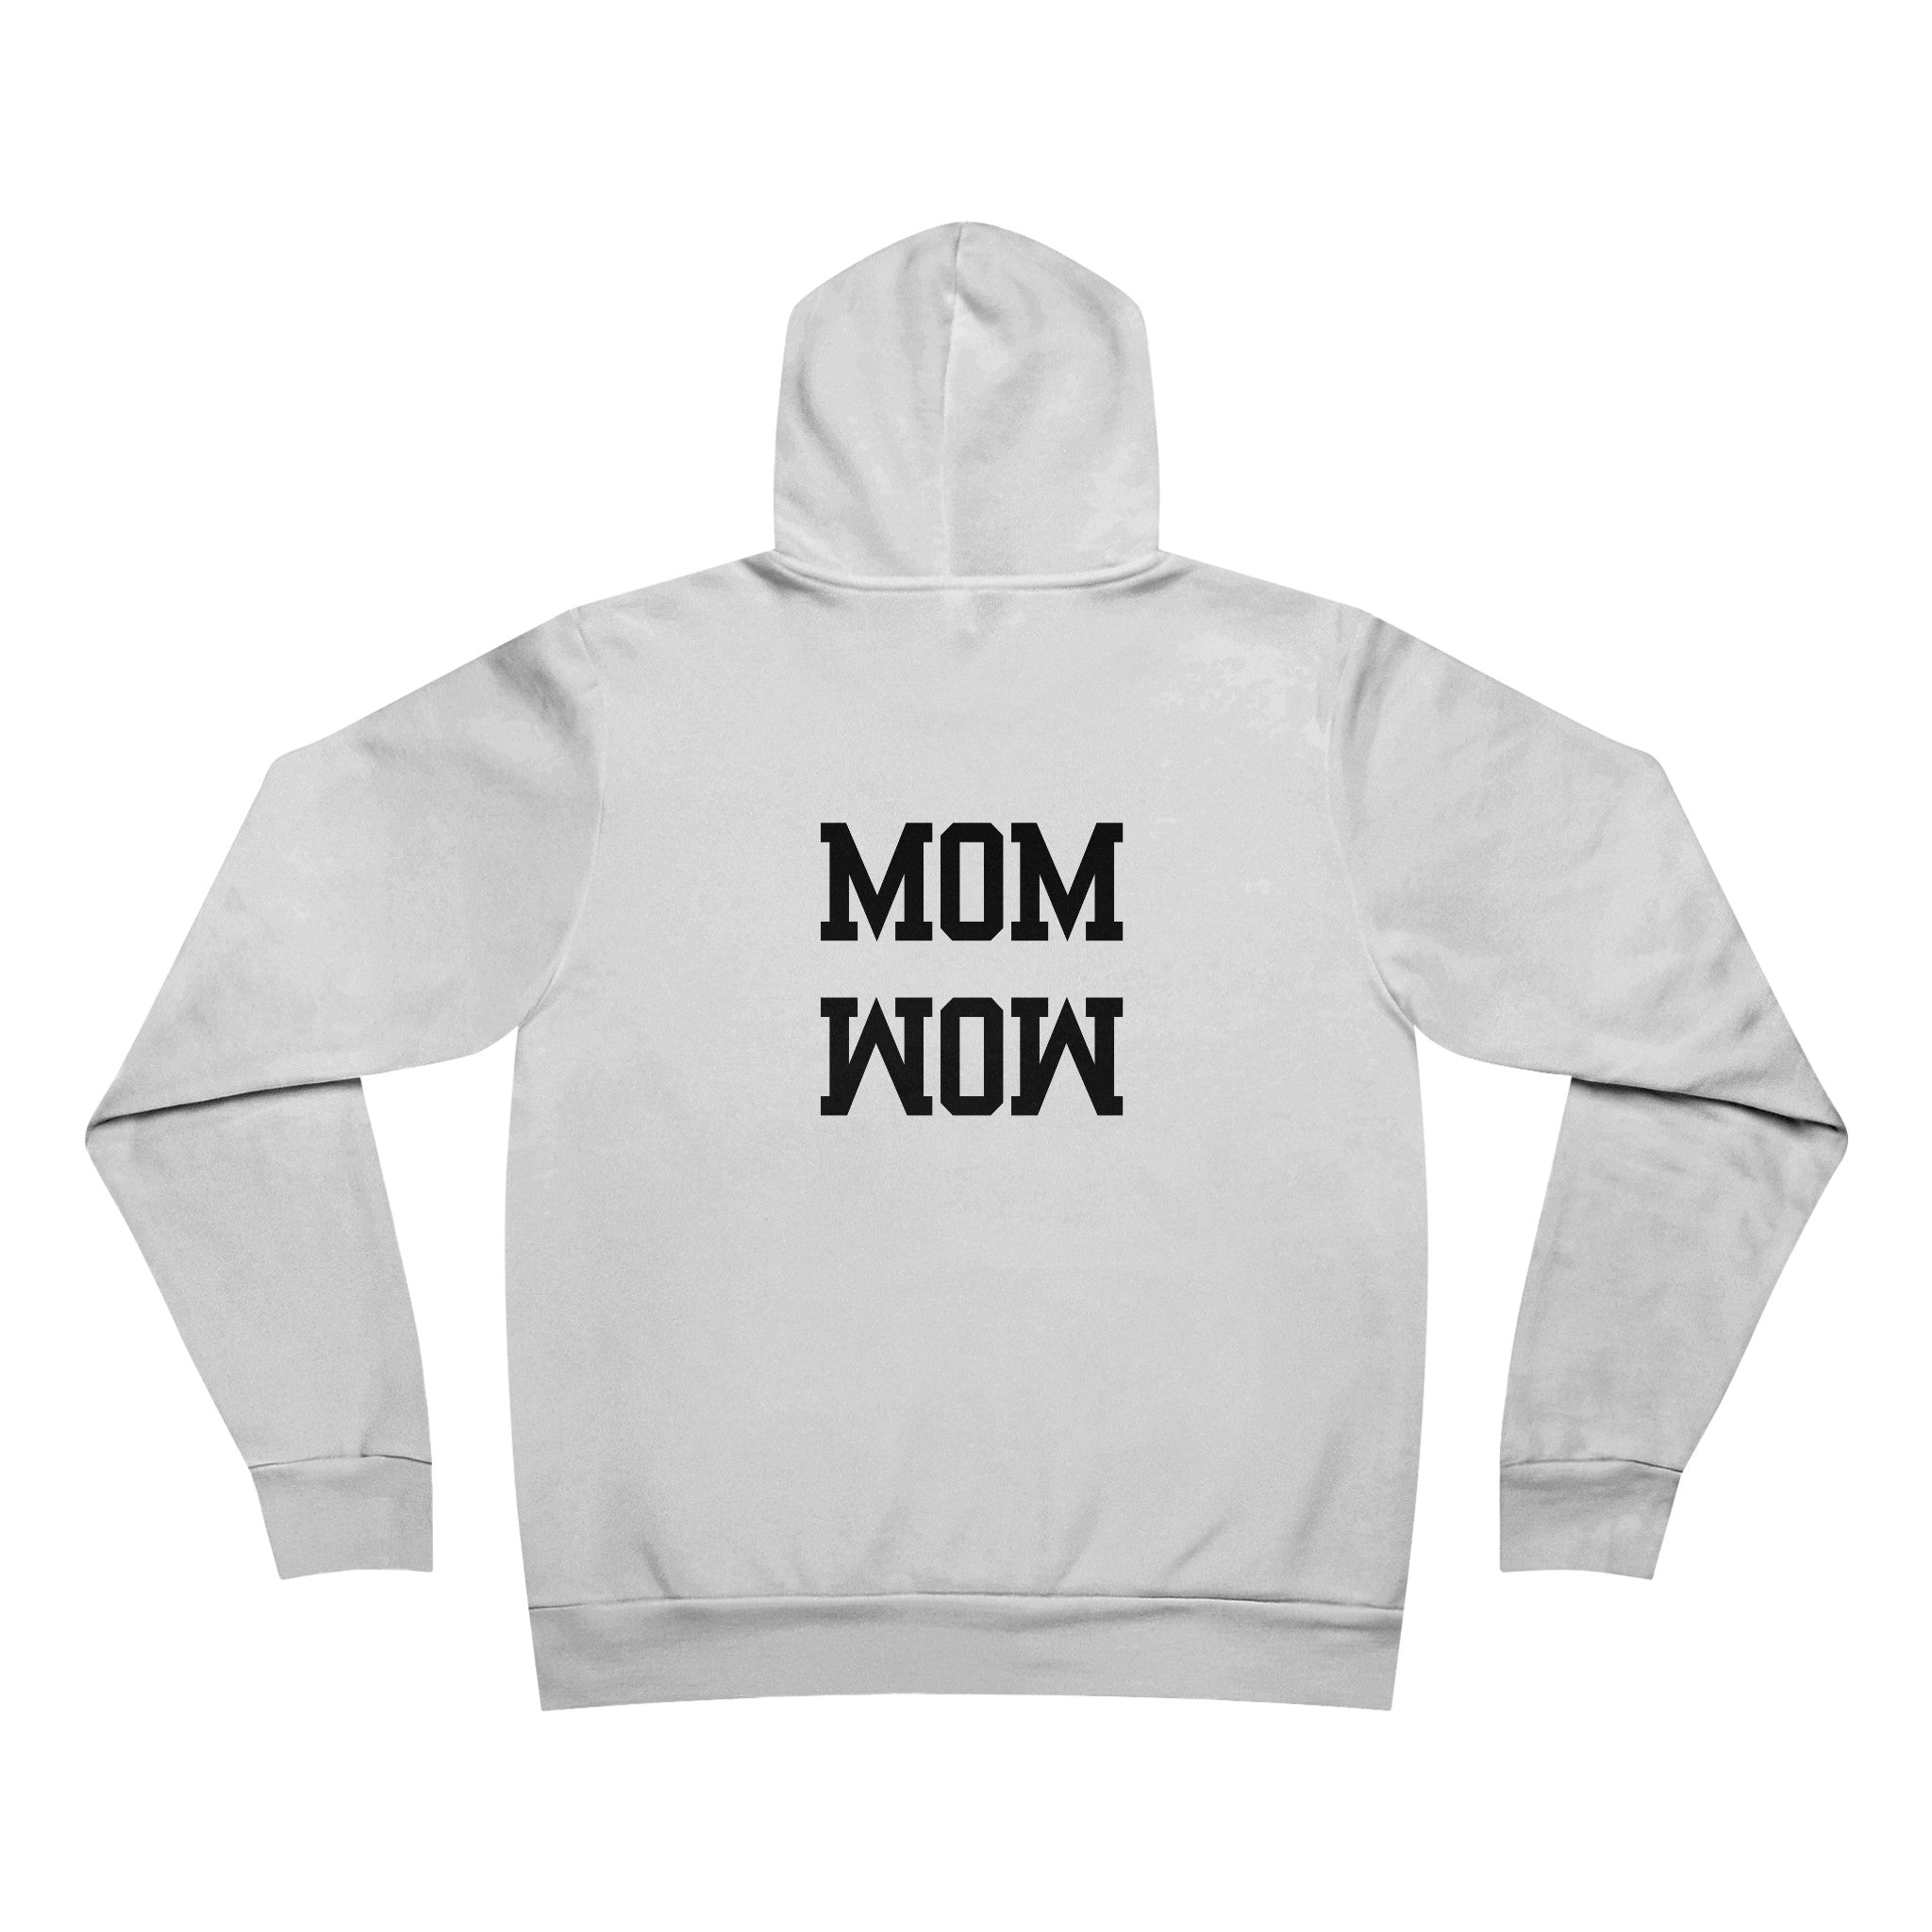 MOM WOW - Unisex Sponge Fleece Pullover Hoodie - Perfect Mother’s Day Gift